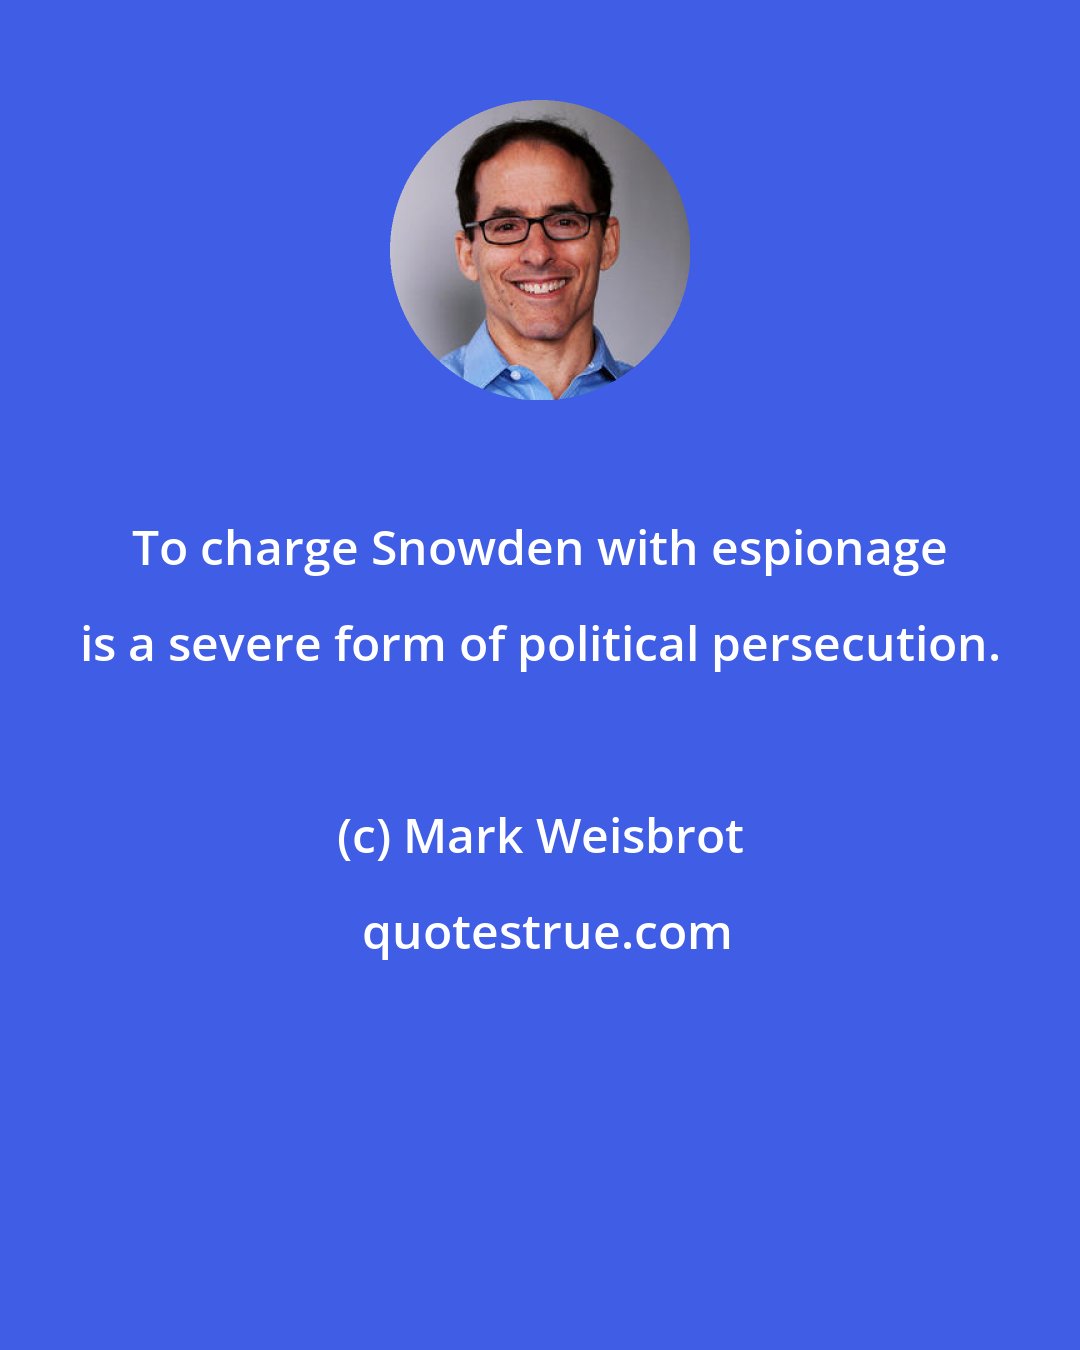 Mark Weisbrot: To charge Snowden with espionage is a severe form of political persecution.